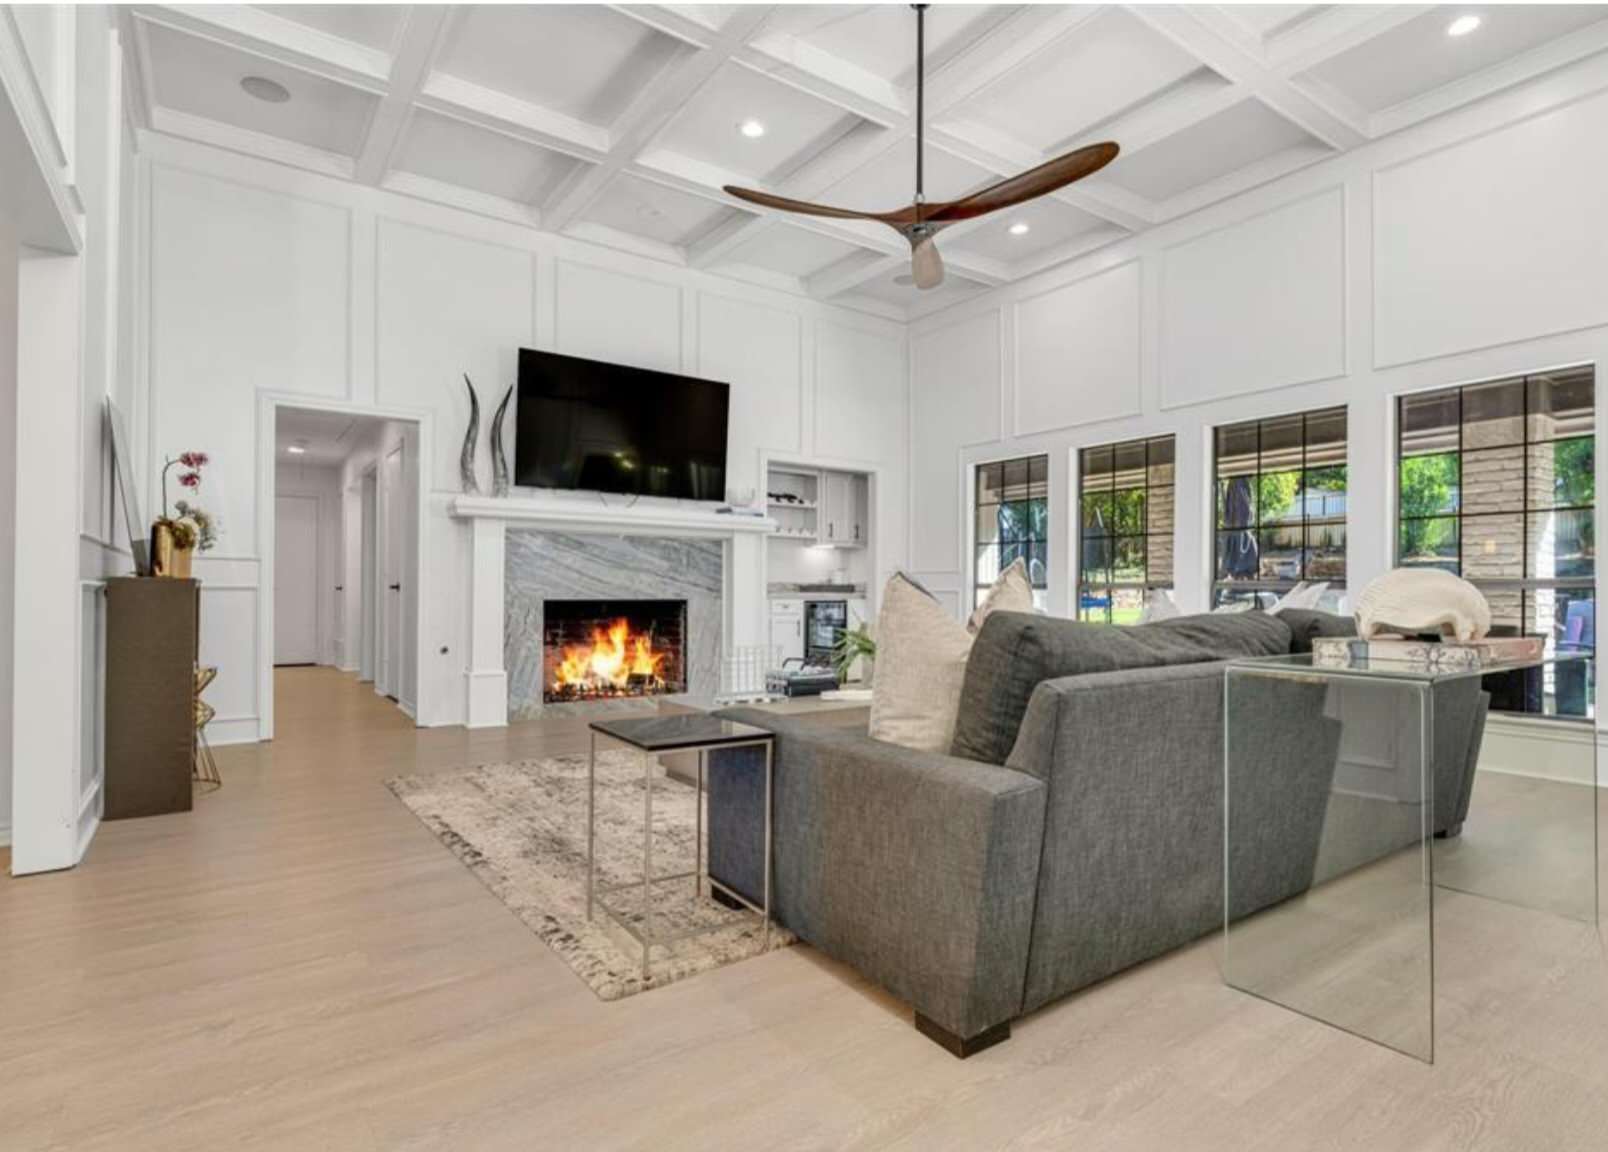 Inspiration for a large contemporary open concept vinyl floor, wood ceiling and wainscoting living room remodel in Dallas with white walls, a wood stove, a stone fireplace and a wall-mounted tv